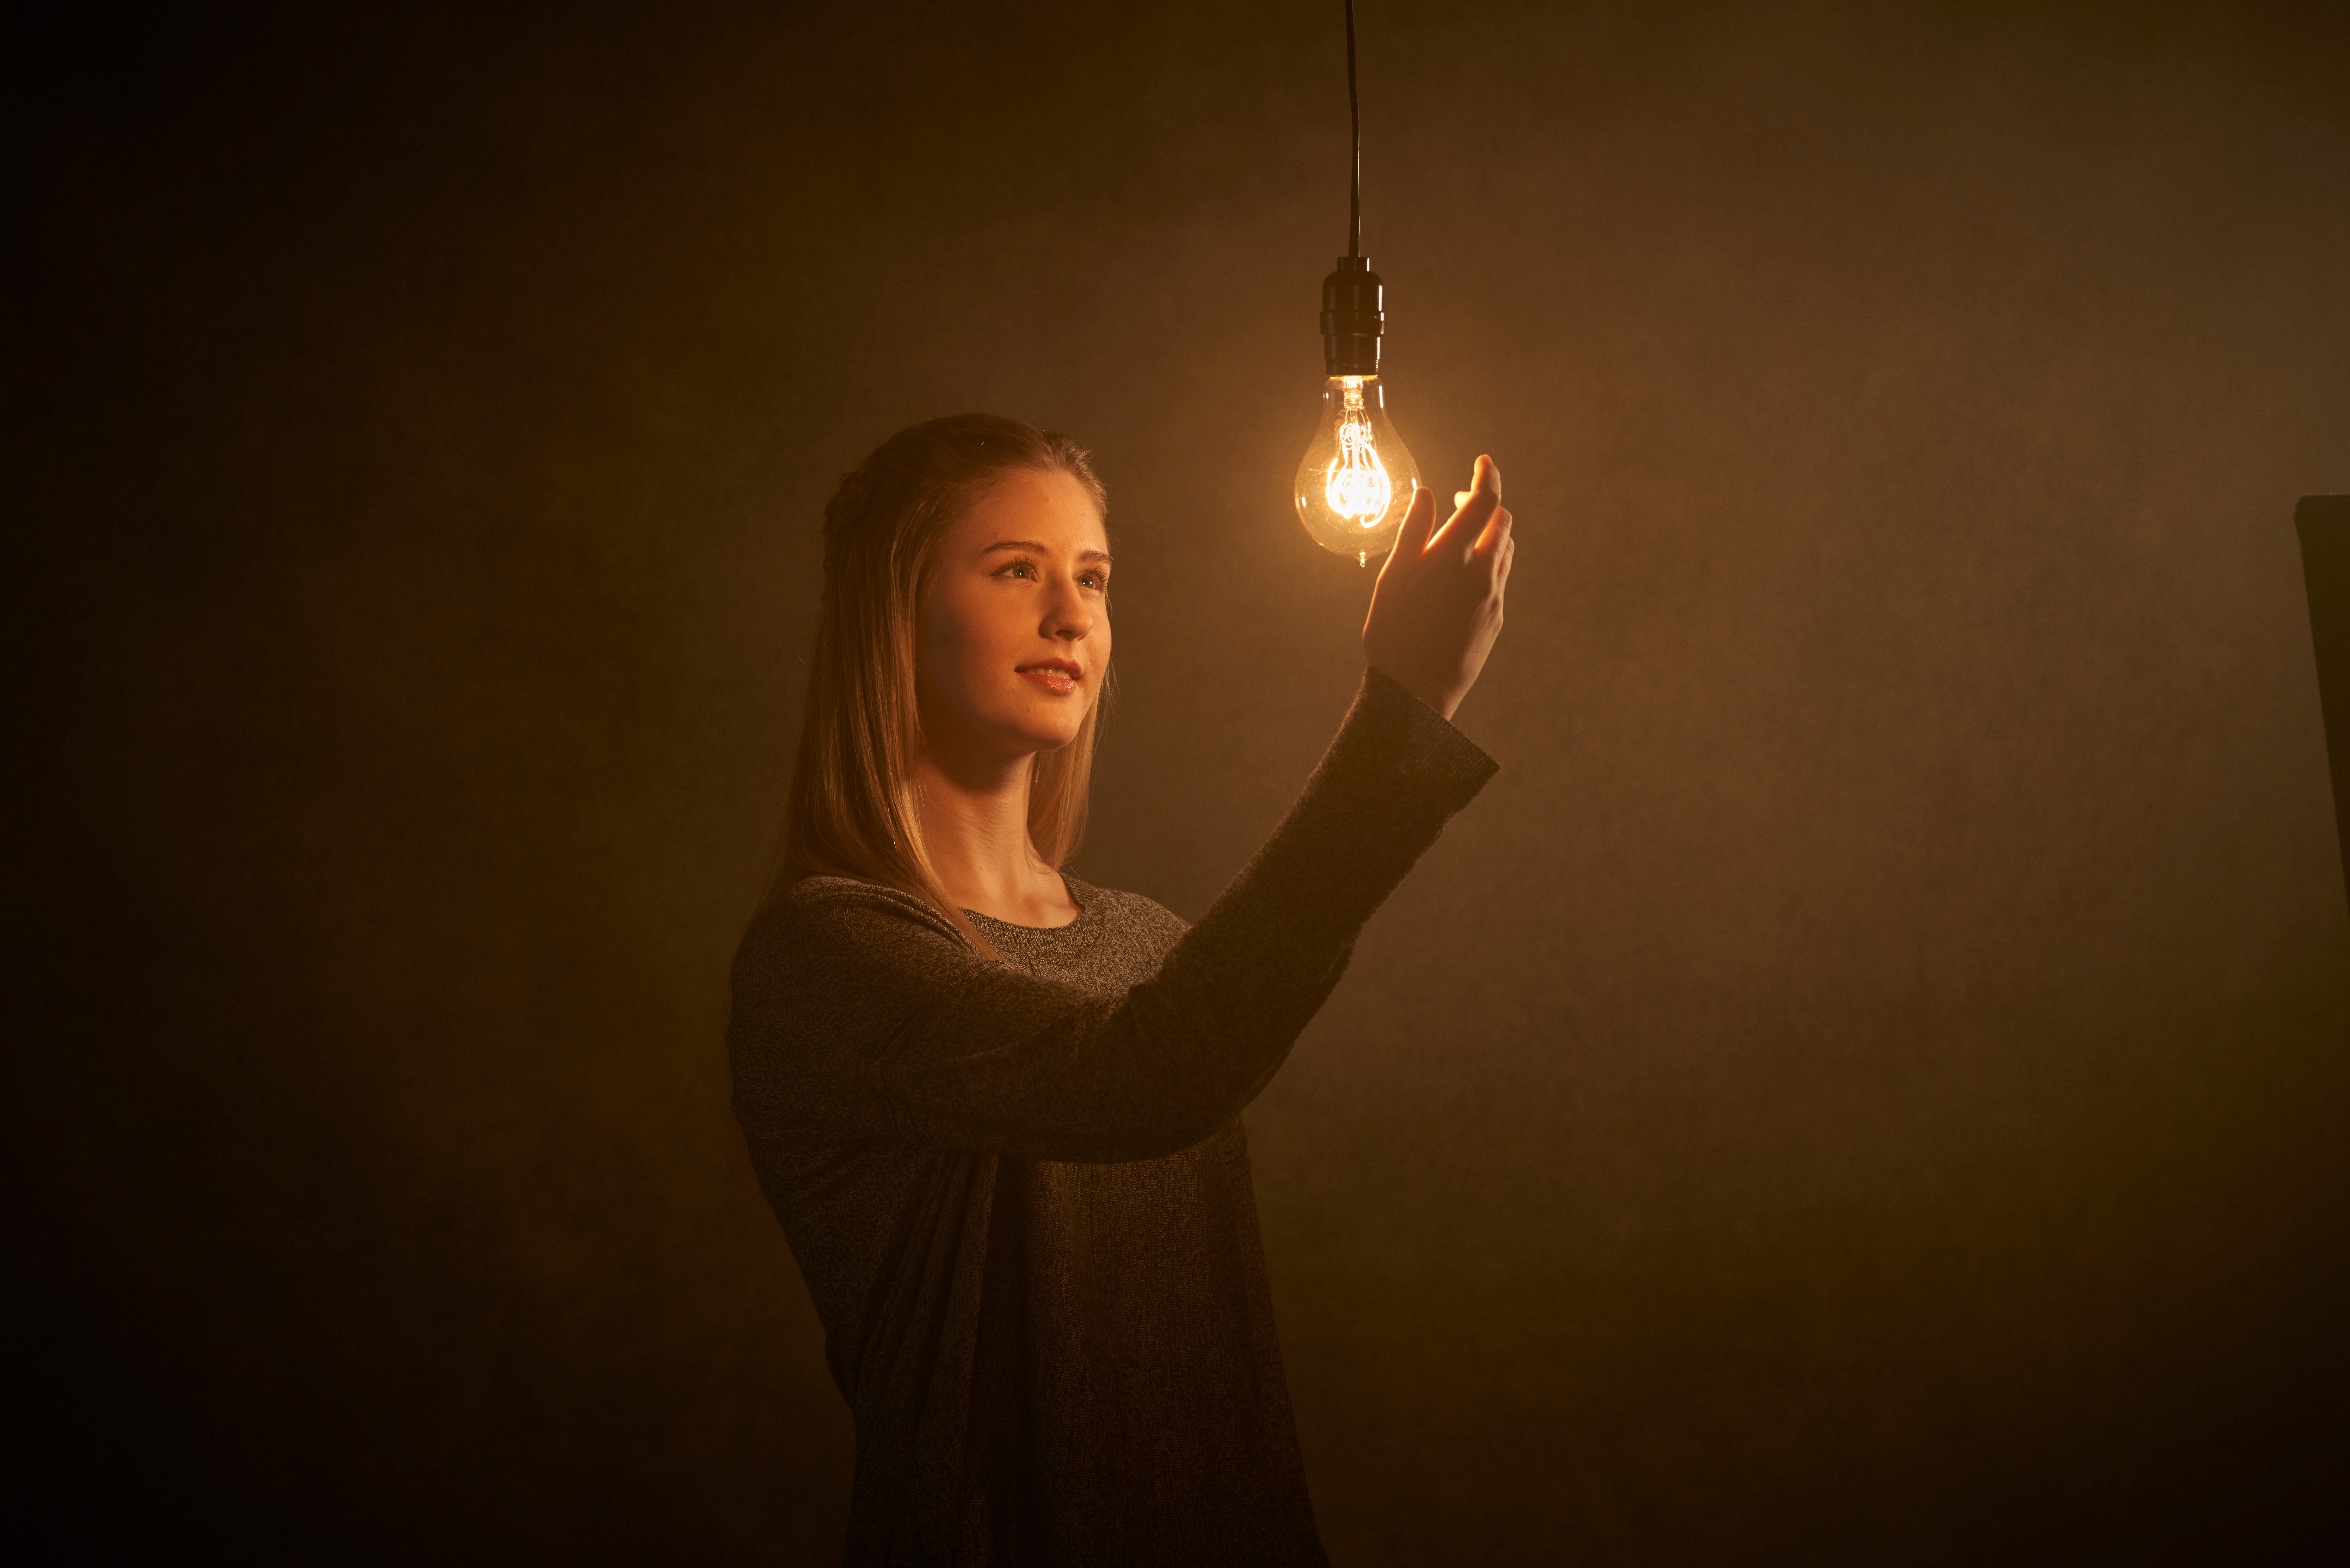 A young woman in a dark room reaching out toward an illuminated light bulb.